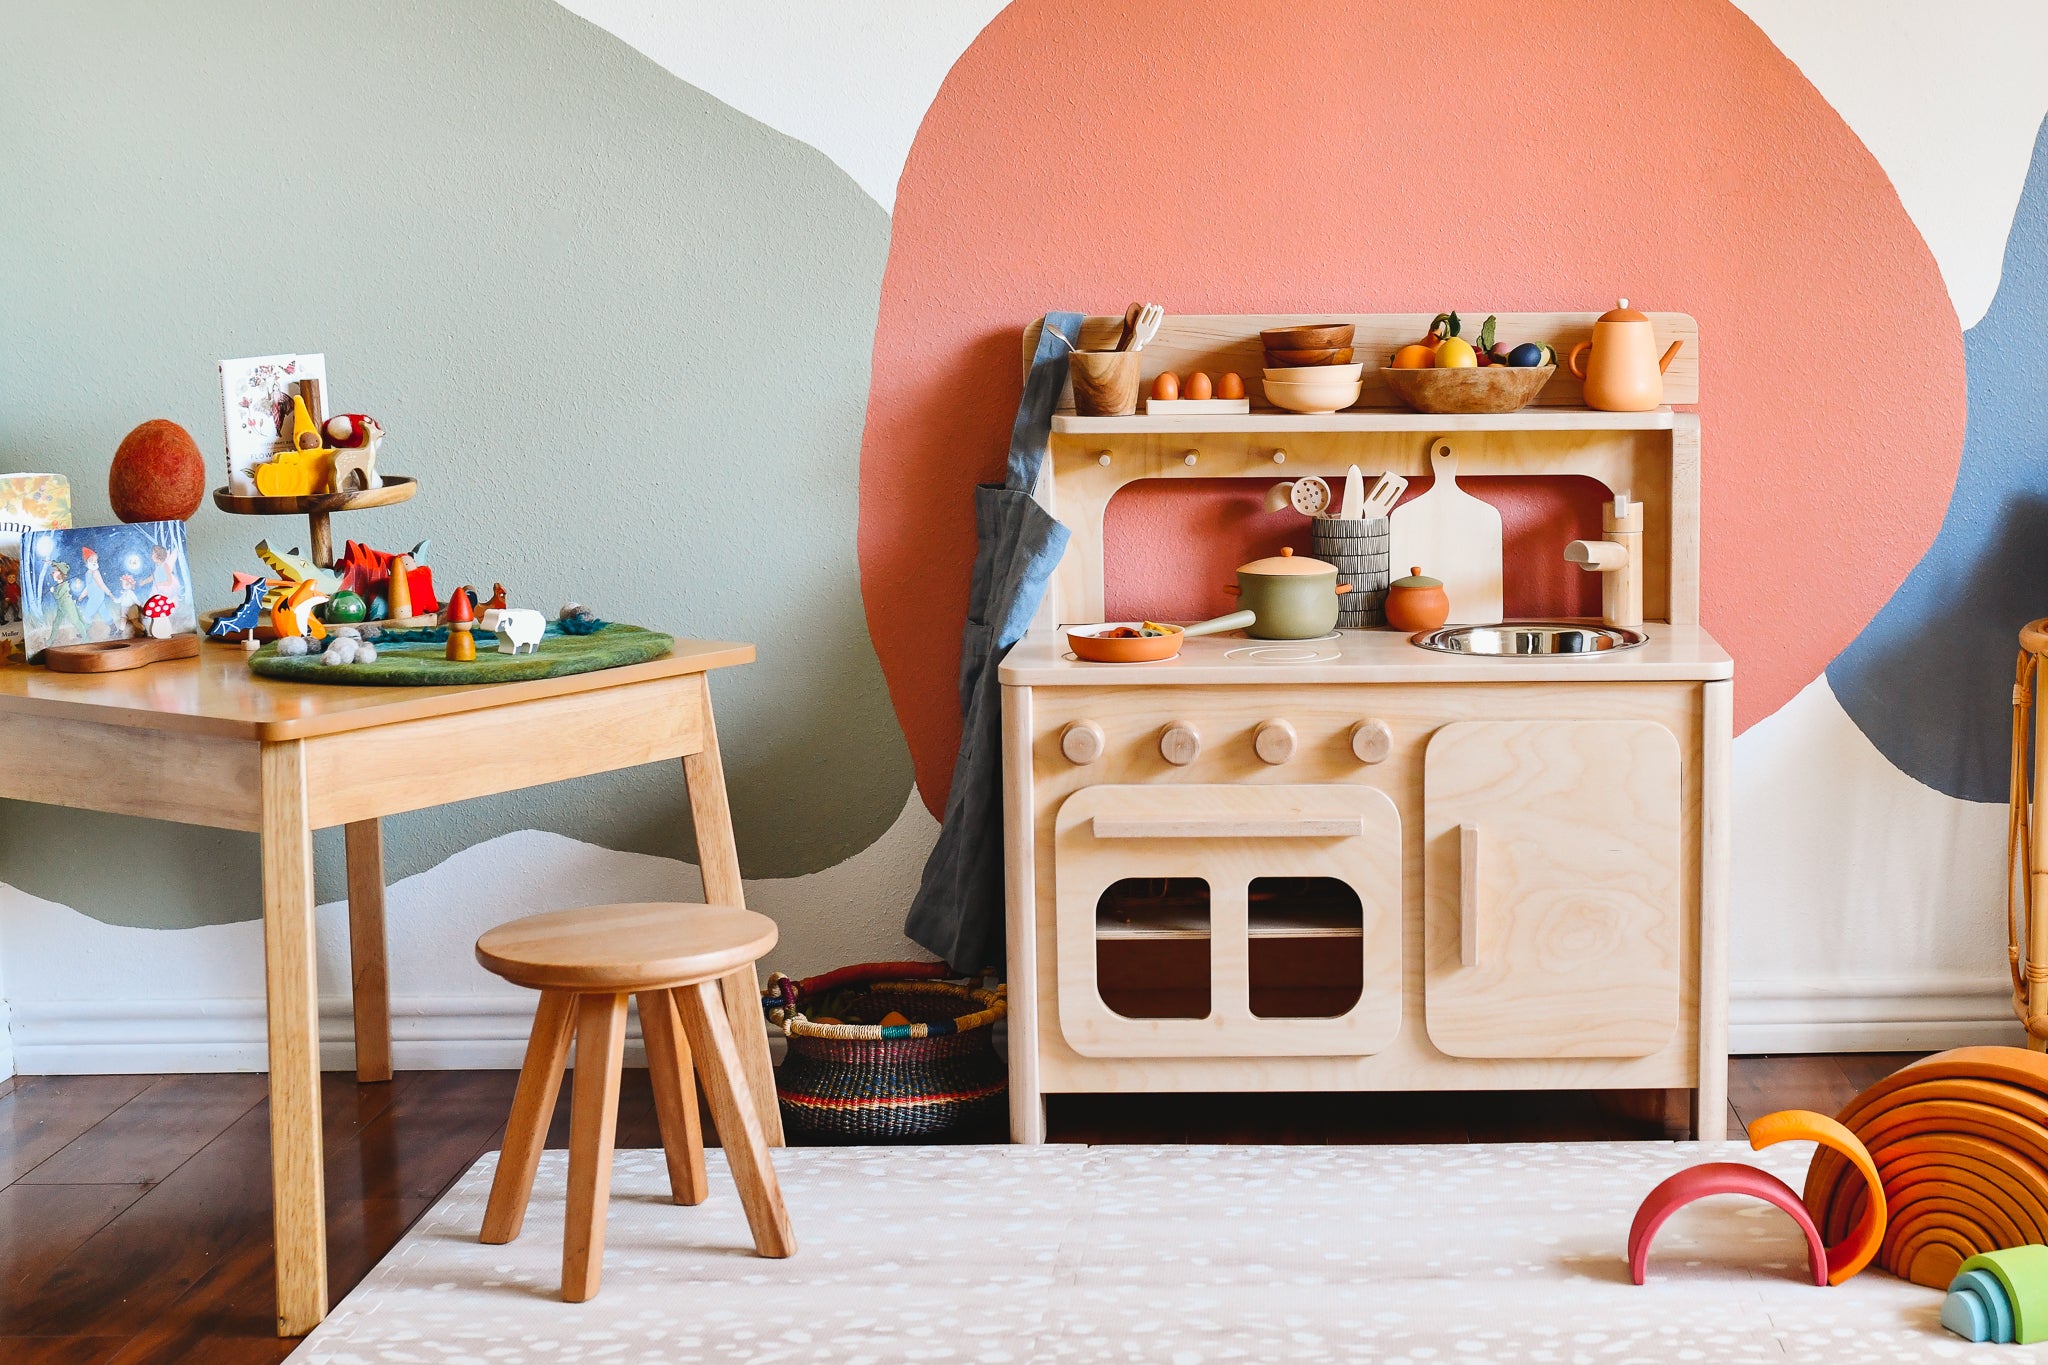 12 Wooden Toys So You Can Skip Plastic In The Playroom - The Good Trade